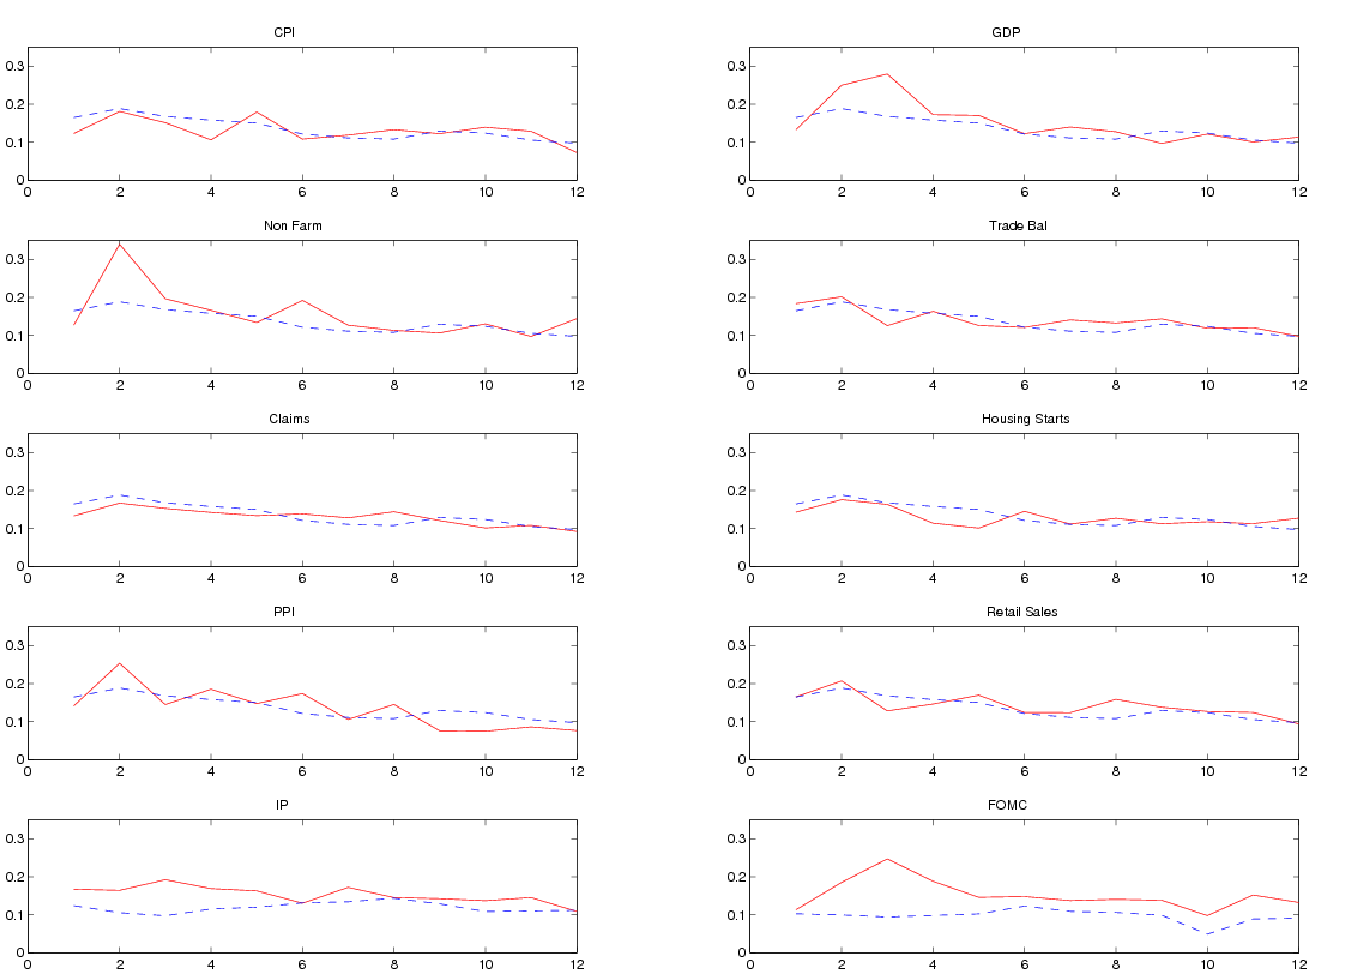 Figure 5 compares mean absolute IBOVESPA returns on announcement days versus non non-announcement days for U.S. macro announcements and for the FOMC announcement.  Results shown are for days when the Bovespa is open at 8:30 am Eastern Time (the “contemporaneous markets” sample).  The solid red lines measure the mean absolute five minute returns on the IBOVESPA in percentage points at each five minute interval beginning at 8:25-8:30 (labeled “1” on the x-axis) to 9:20 to 9:25 (labeled “12” on the x-axis).  The dotted blue lines measure the mean absolute return on non-announcement days, similarly measured.  Non-announcement days exclude days of major Brazilian and U.S. macro announcements.  All macro announcements are at 8:30 am, except for industrial production, which is at 9:15 am.  The sample of FOMC announcements consists of scheduled FOMC meetings.  The number of observations in parenthesis after each release: CPI (15); claims (103); GDP (24); housing starts (19); industrial production (64); Nonfarm payrolls (26); PPI (18); retail sales (24); trade balance (25); FOMC decisions (43). The U.S. unemployment announcement is made concurrently with the nonfarm payrolls announcement; hence, there is no separate chart.
Both mean absolute returns for CPI starts around 0.15 and fall towards 0.10.  Returns in other panels behave similarly, except for IP and FOMC, where
mean absolute returns on announcement days tend to be slightly higher (0.01-0.05) to start, with the discrepancy narrowing over time.